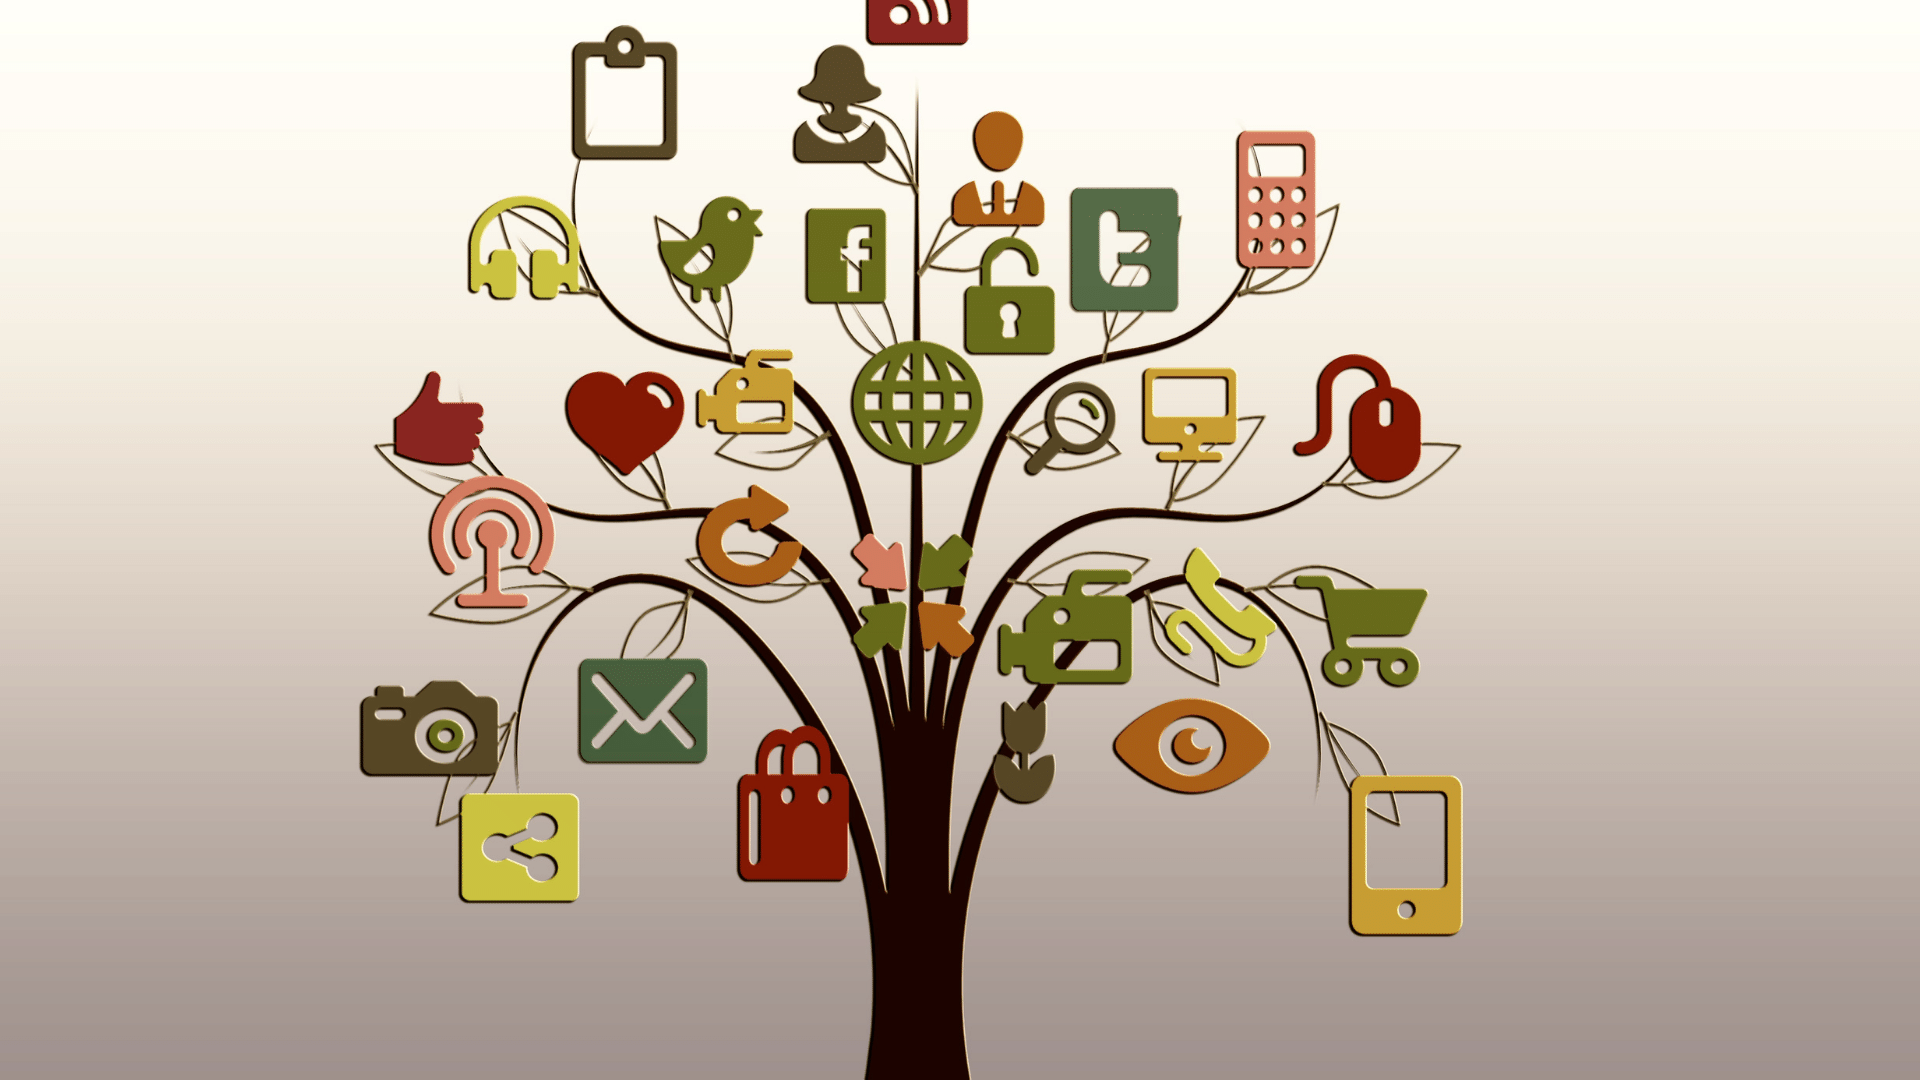 Illustration of a tree. Each branch ends in a different icon representing a networking opportunity.